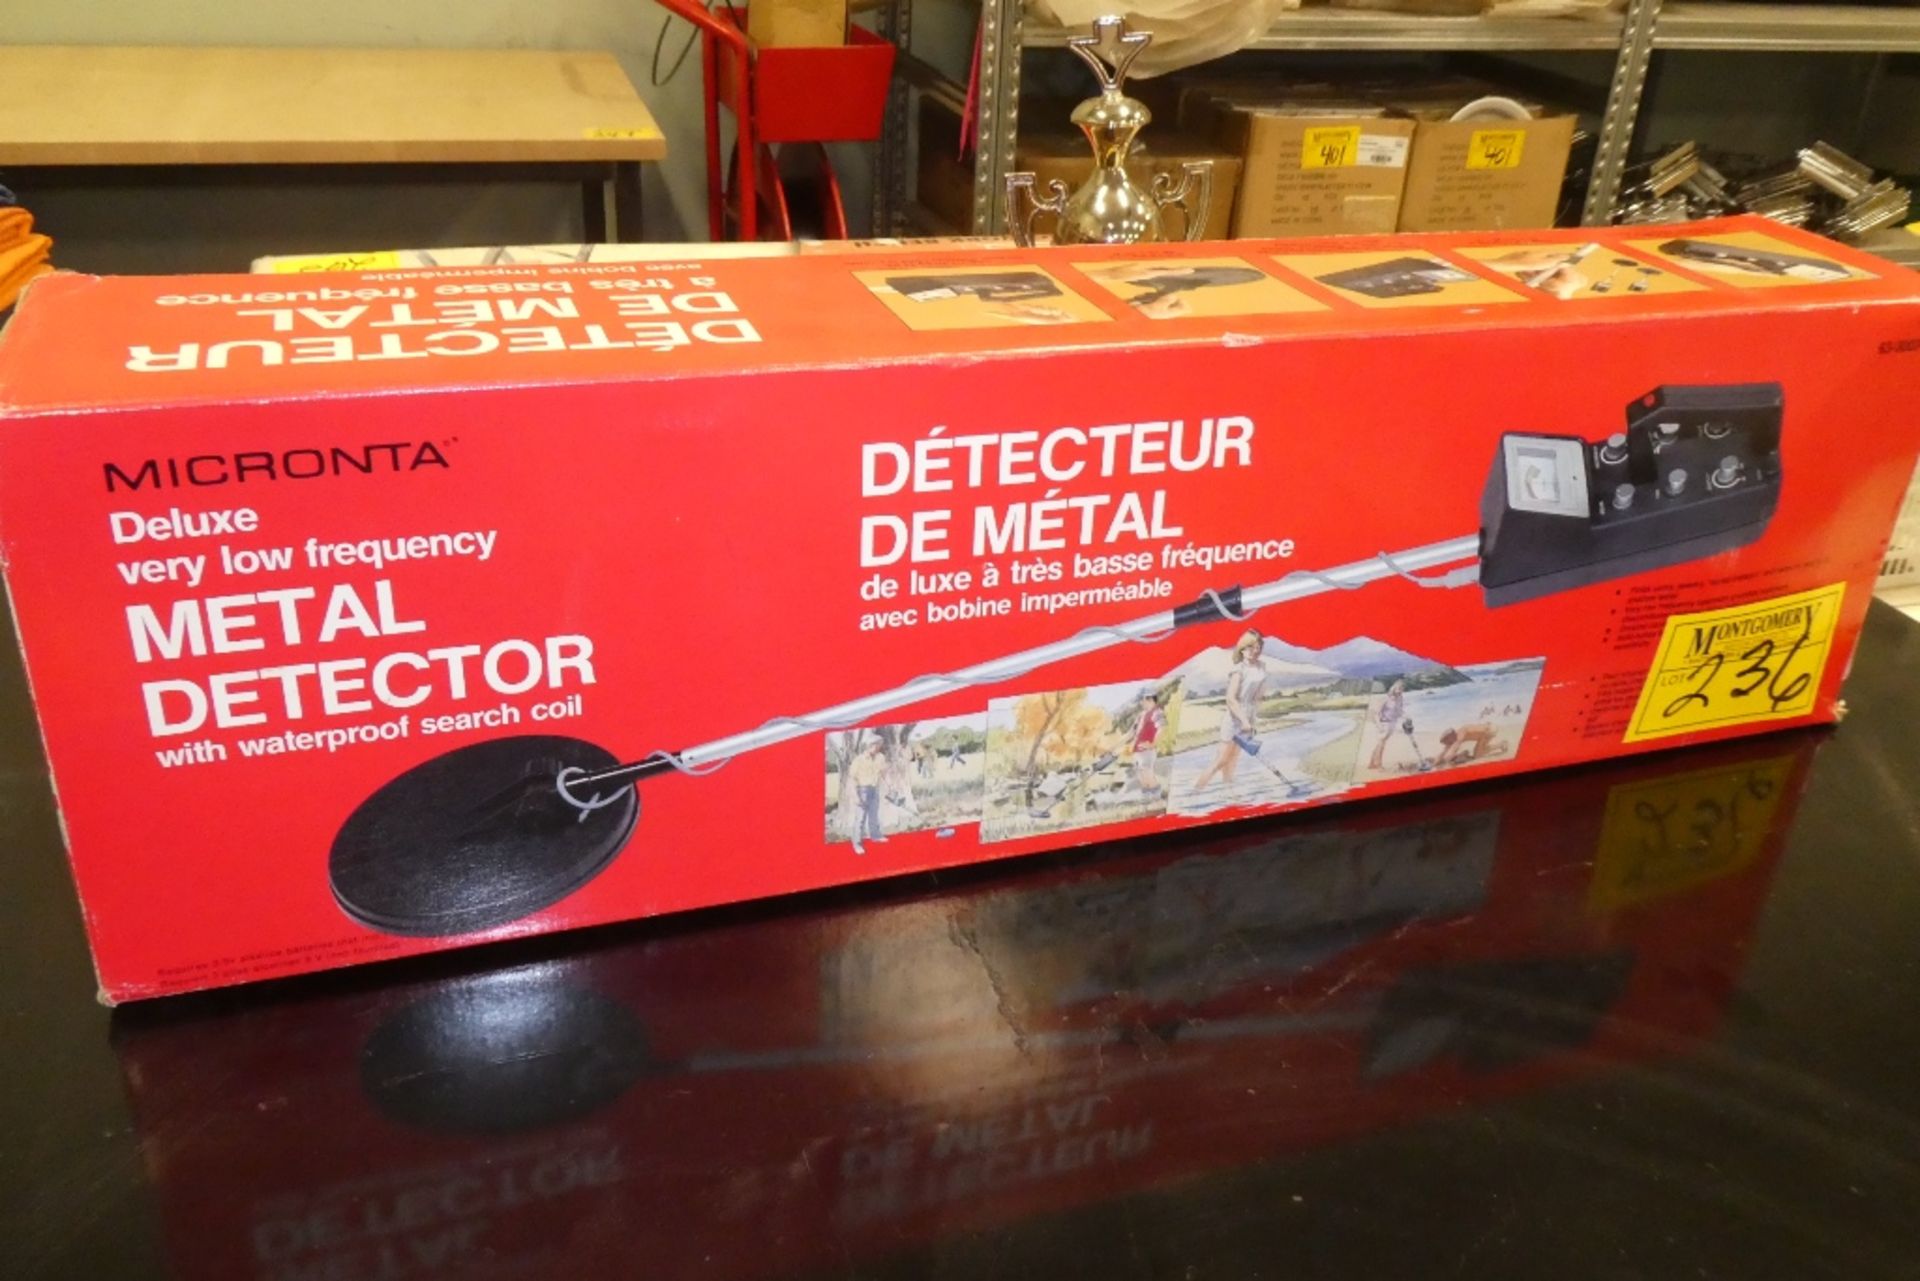 MICRONTA DELUXE METAL DETECTOR VERY LOW FREQUENCY W/ WATERPROOF SEARCH COIL